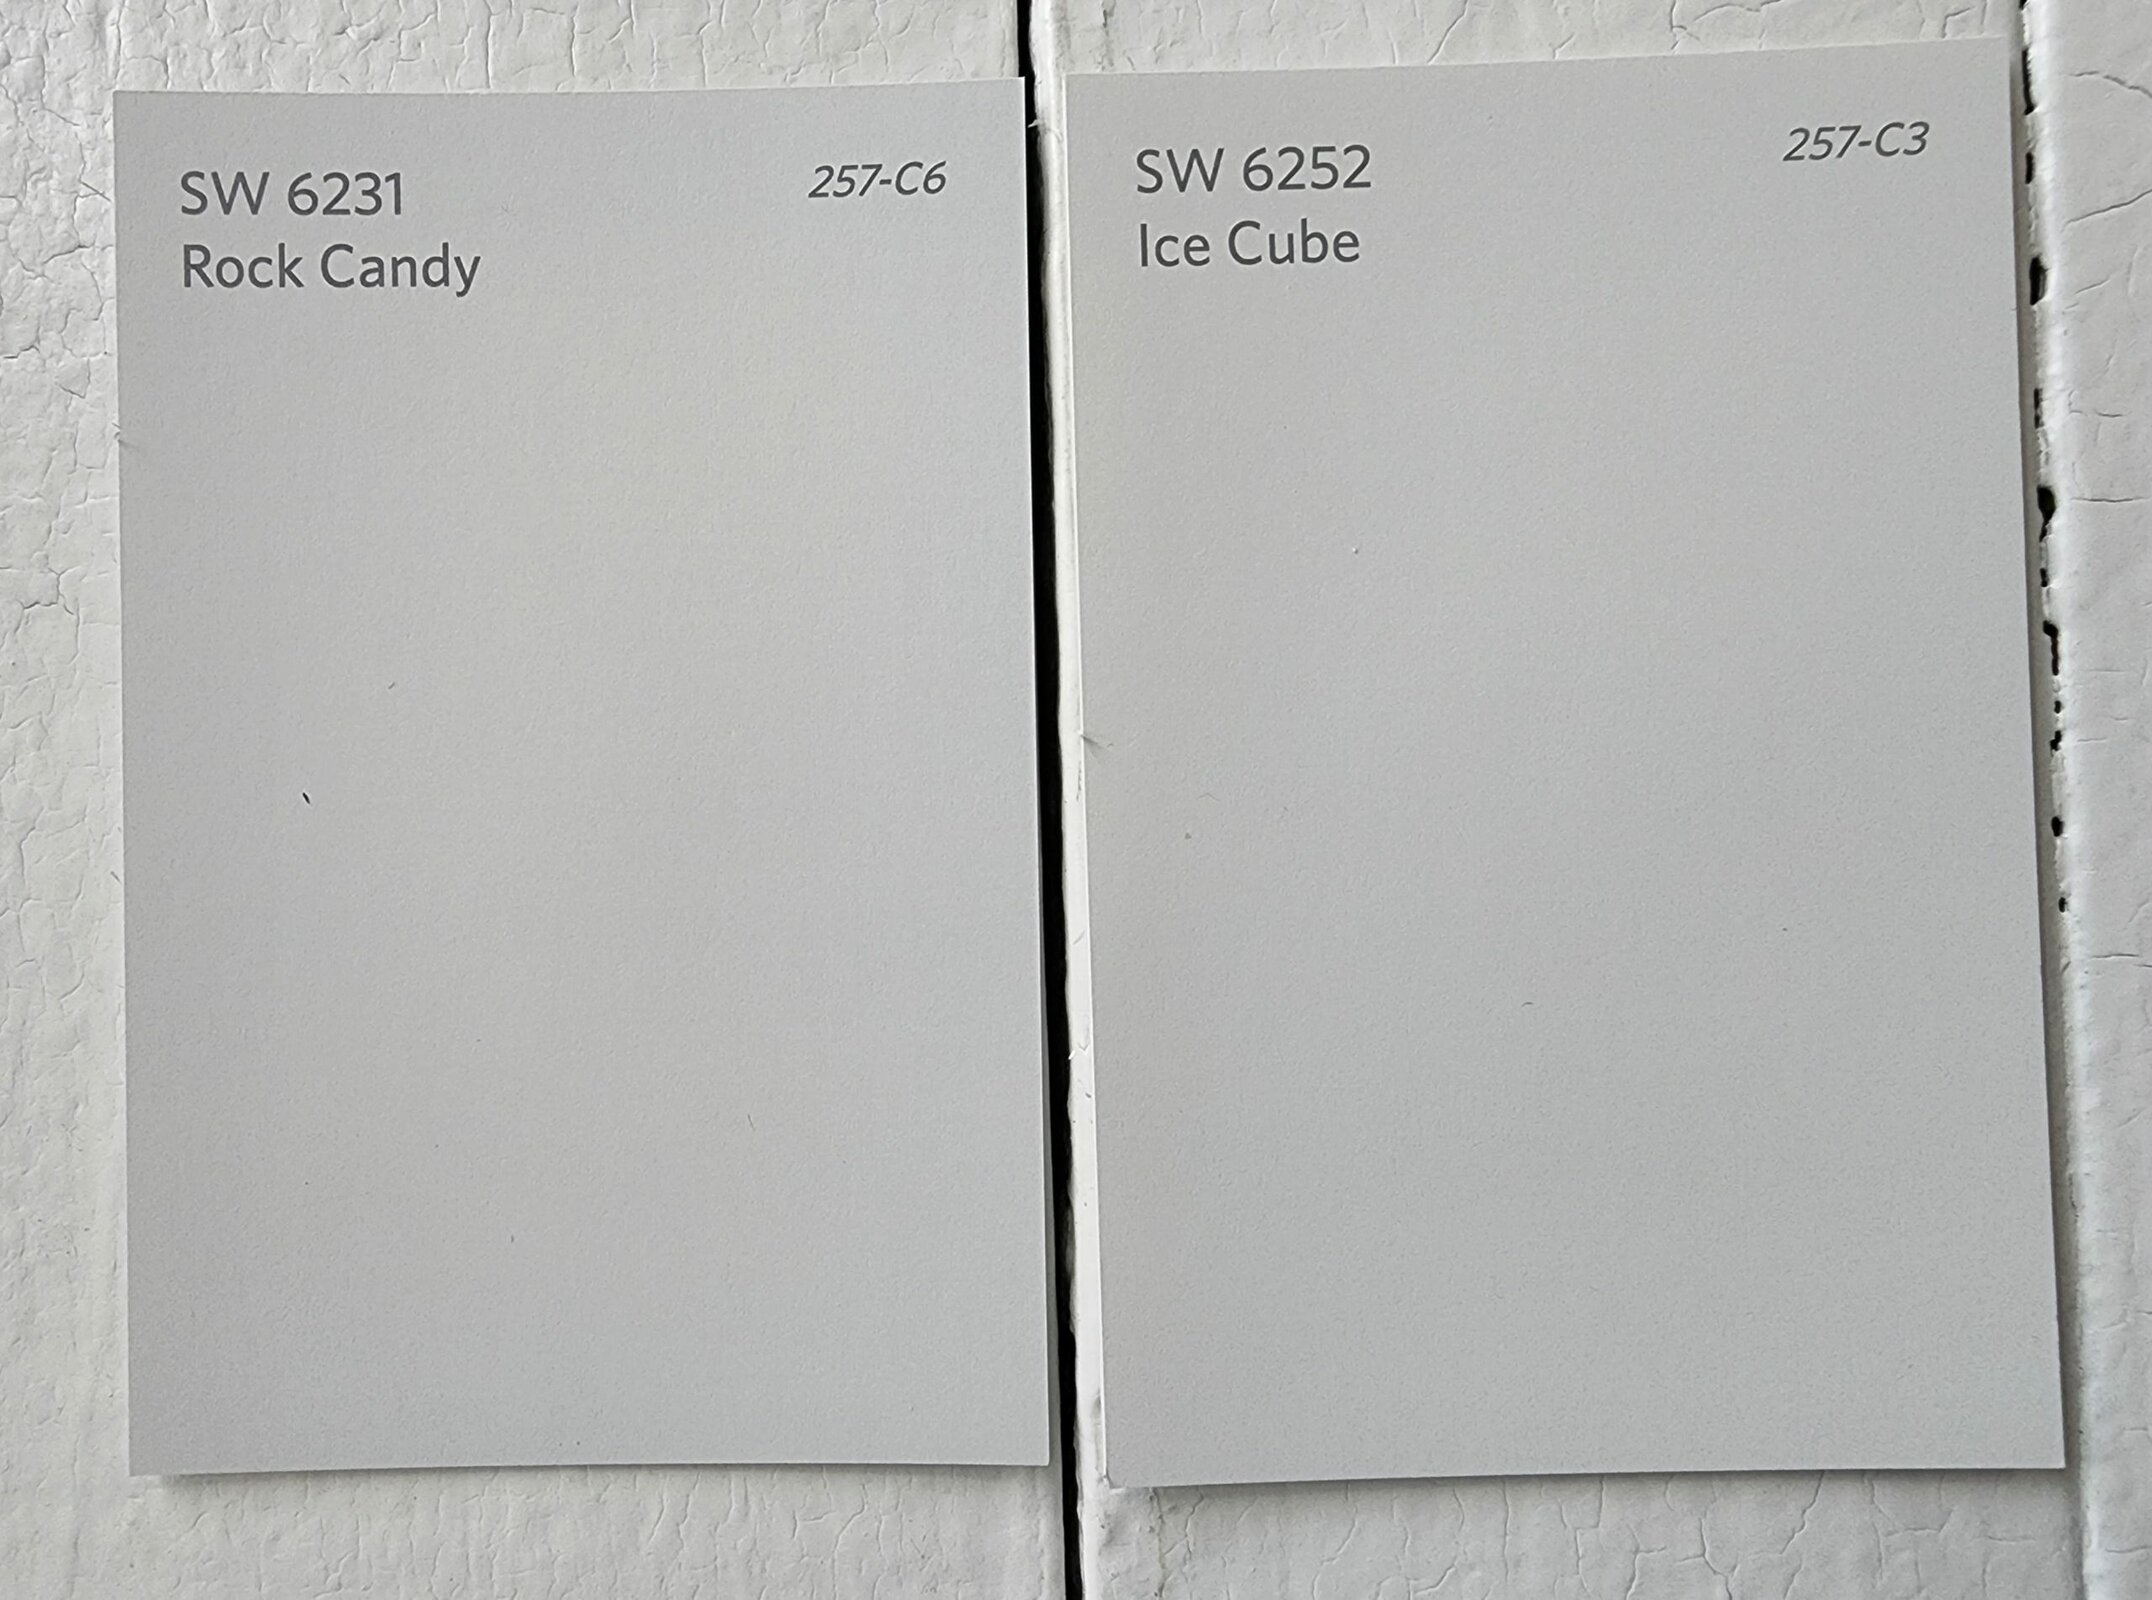  Rock Candy vs Ice Cube by Sherwin Williams scaled